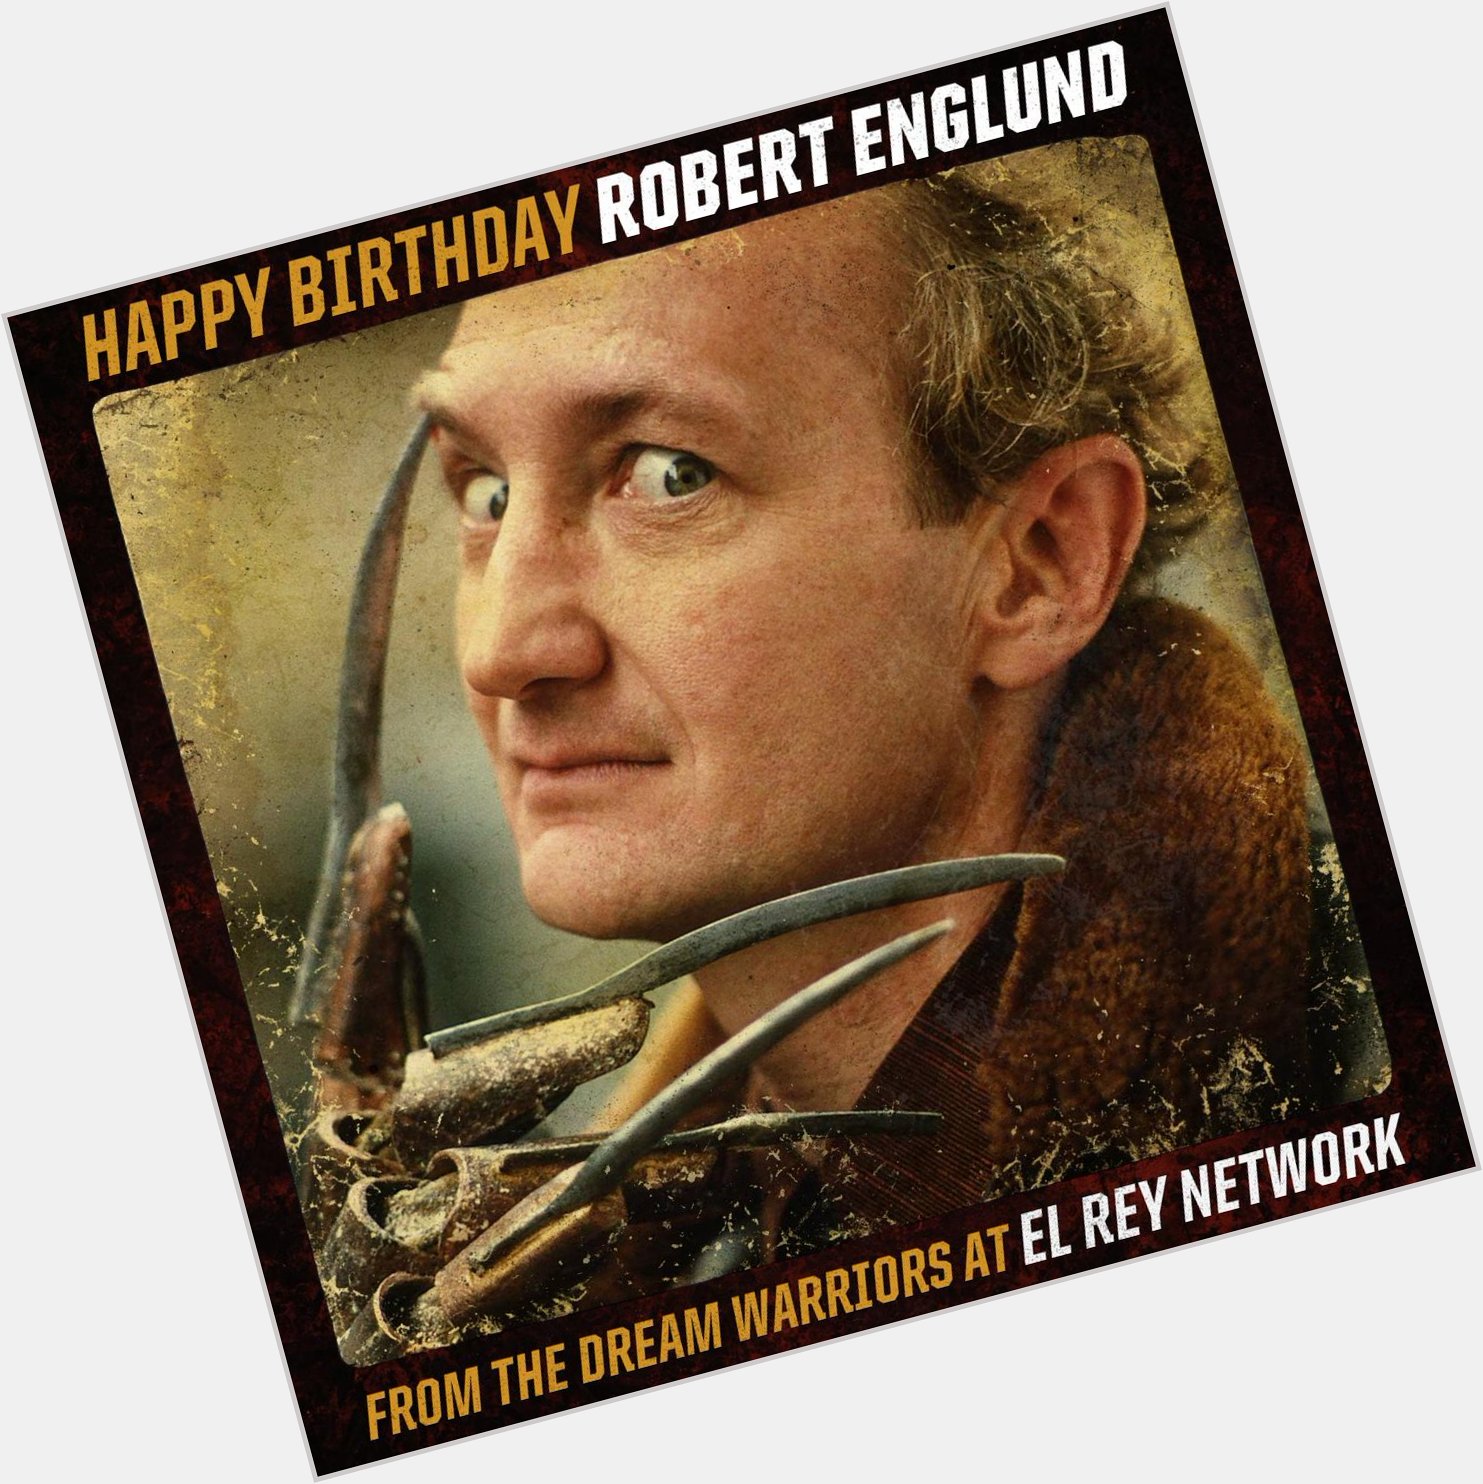 Happy birthday to the man of our dreams... err... nightmares, Robert Englund! 